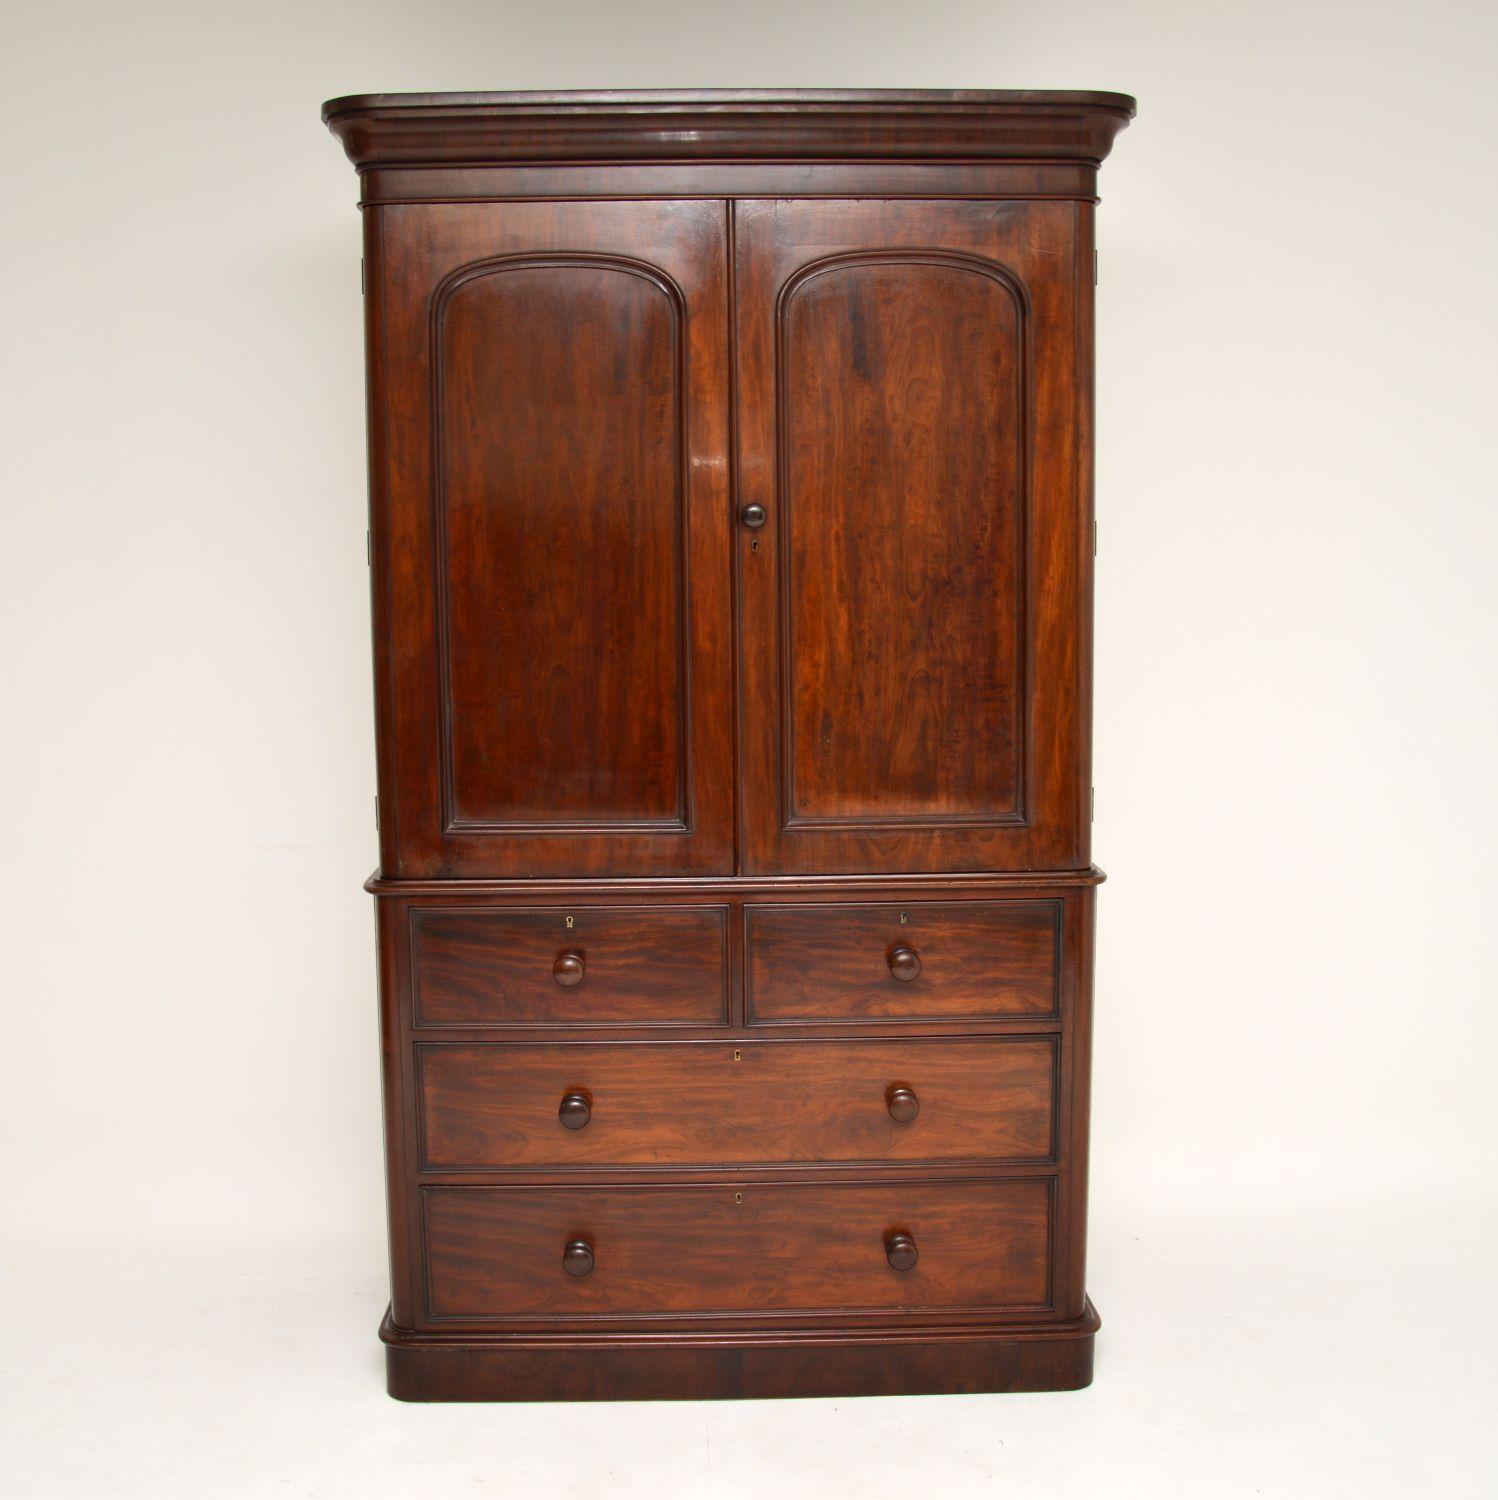 A top quality antique Victorian linen press, beautifully made from mahogany. This dates from circa 1860-1880 period.

It is really well made, with a nicely moulded cornice and base. This has tons of storage space, with four deep lower drawers and